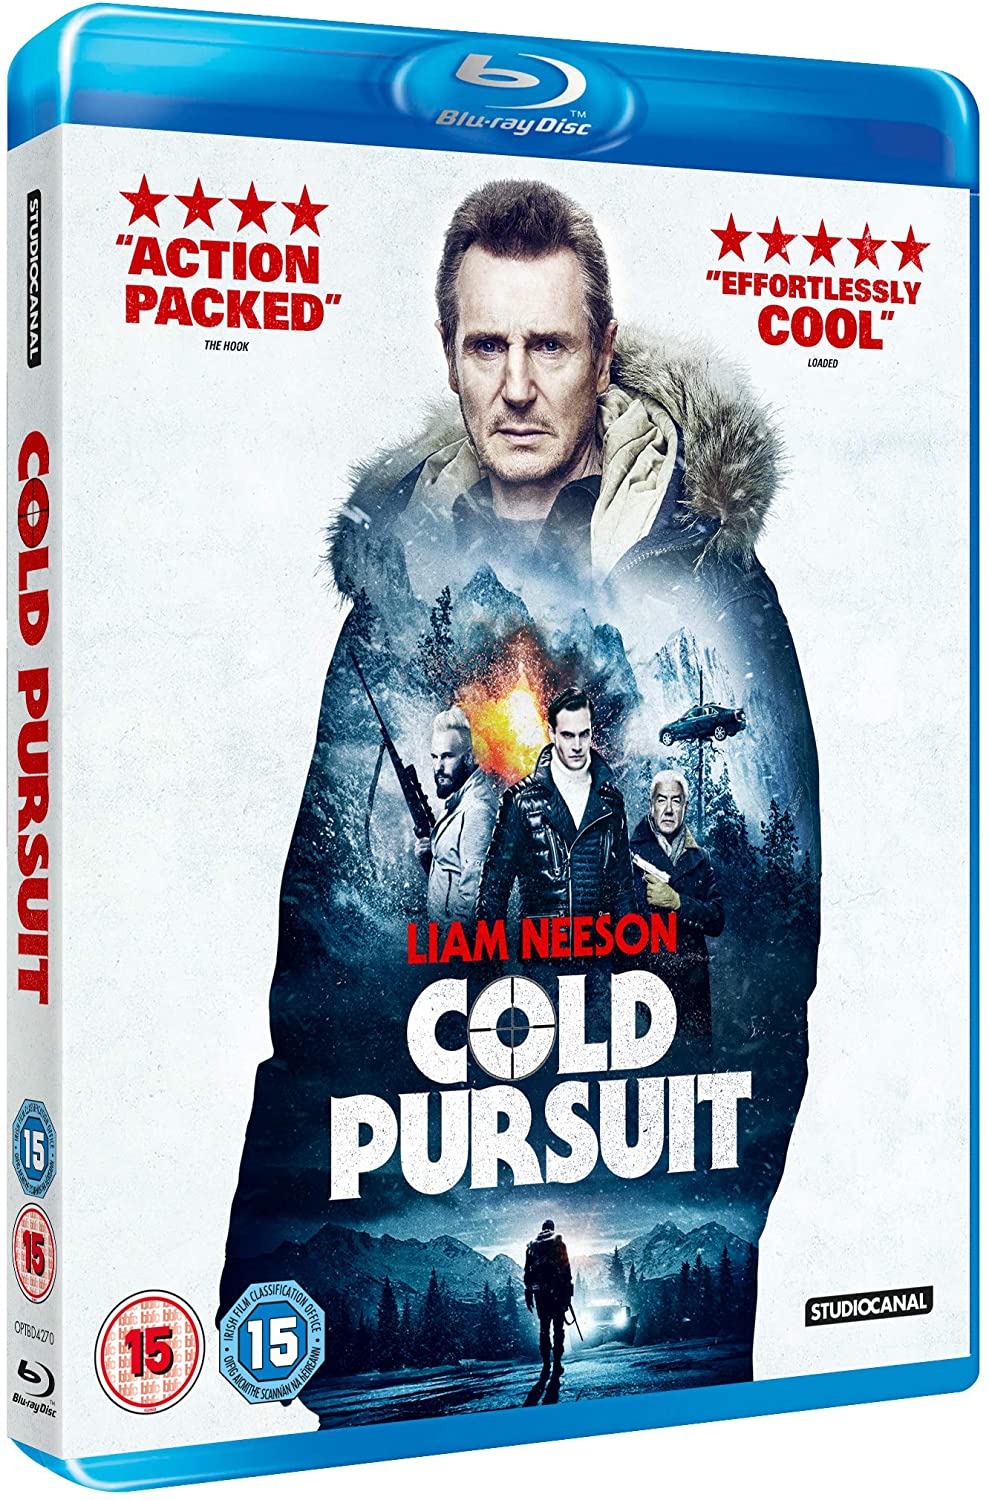 Cold Pursuit- Action/Thriller [Blu-ray]